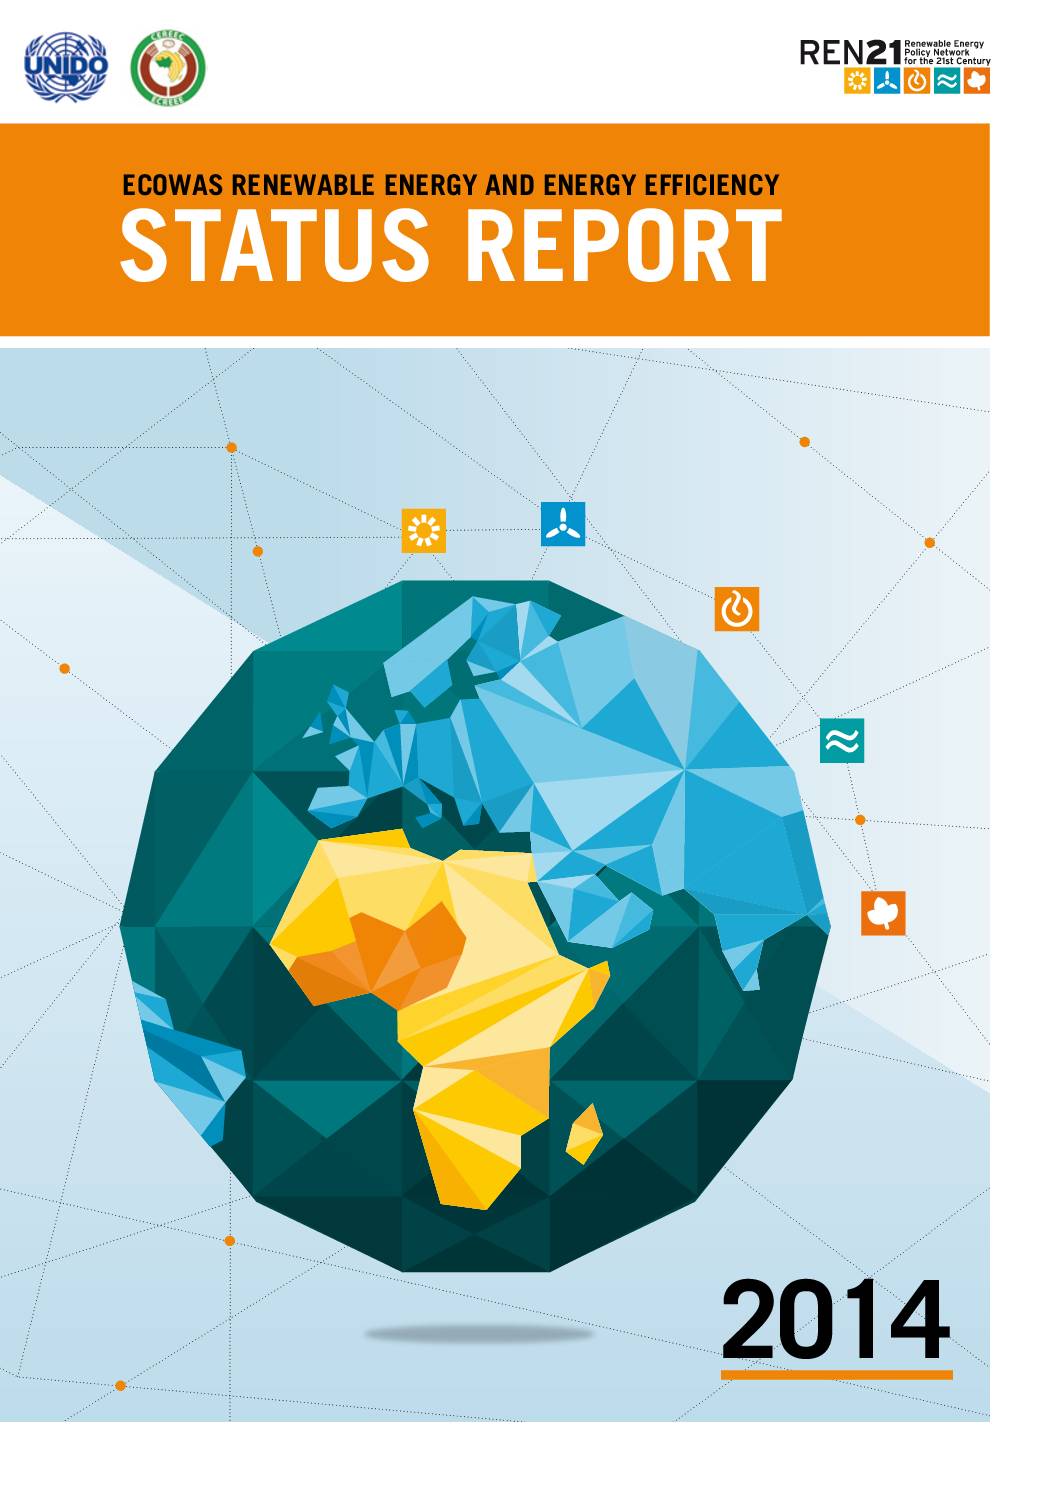 The Economic Community of West African States (ECOWAS) Renewable Energy and Energy Efficiency Status Report